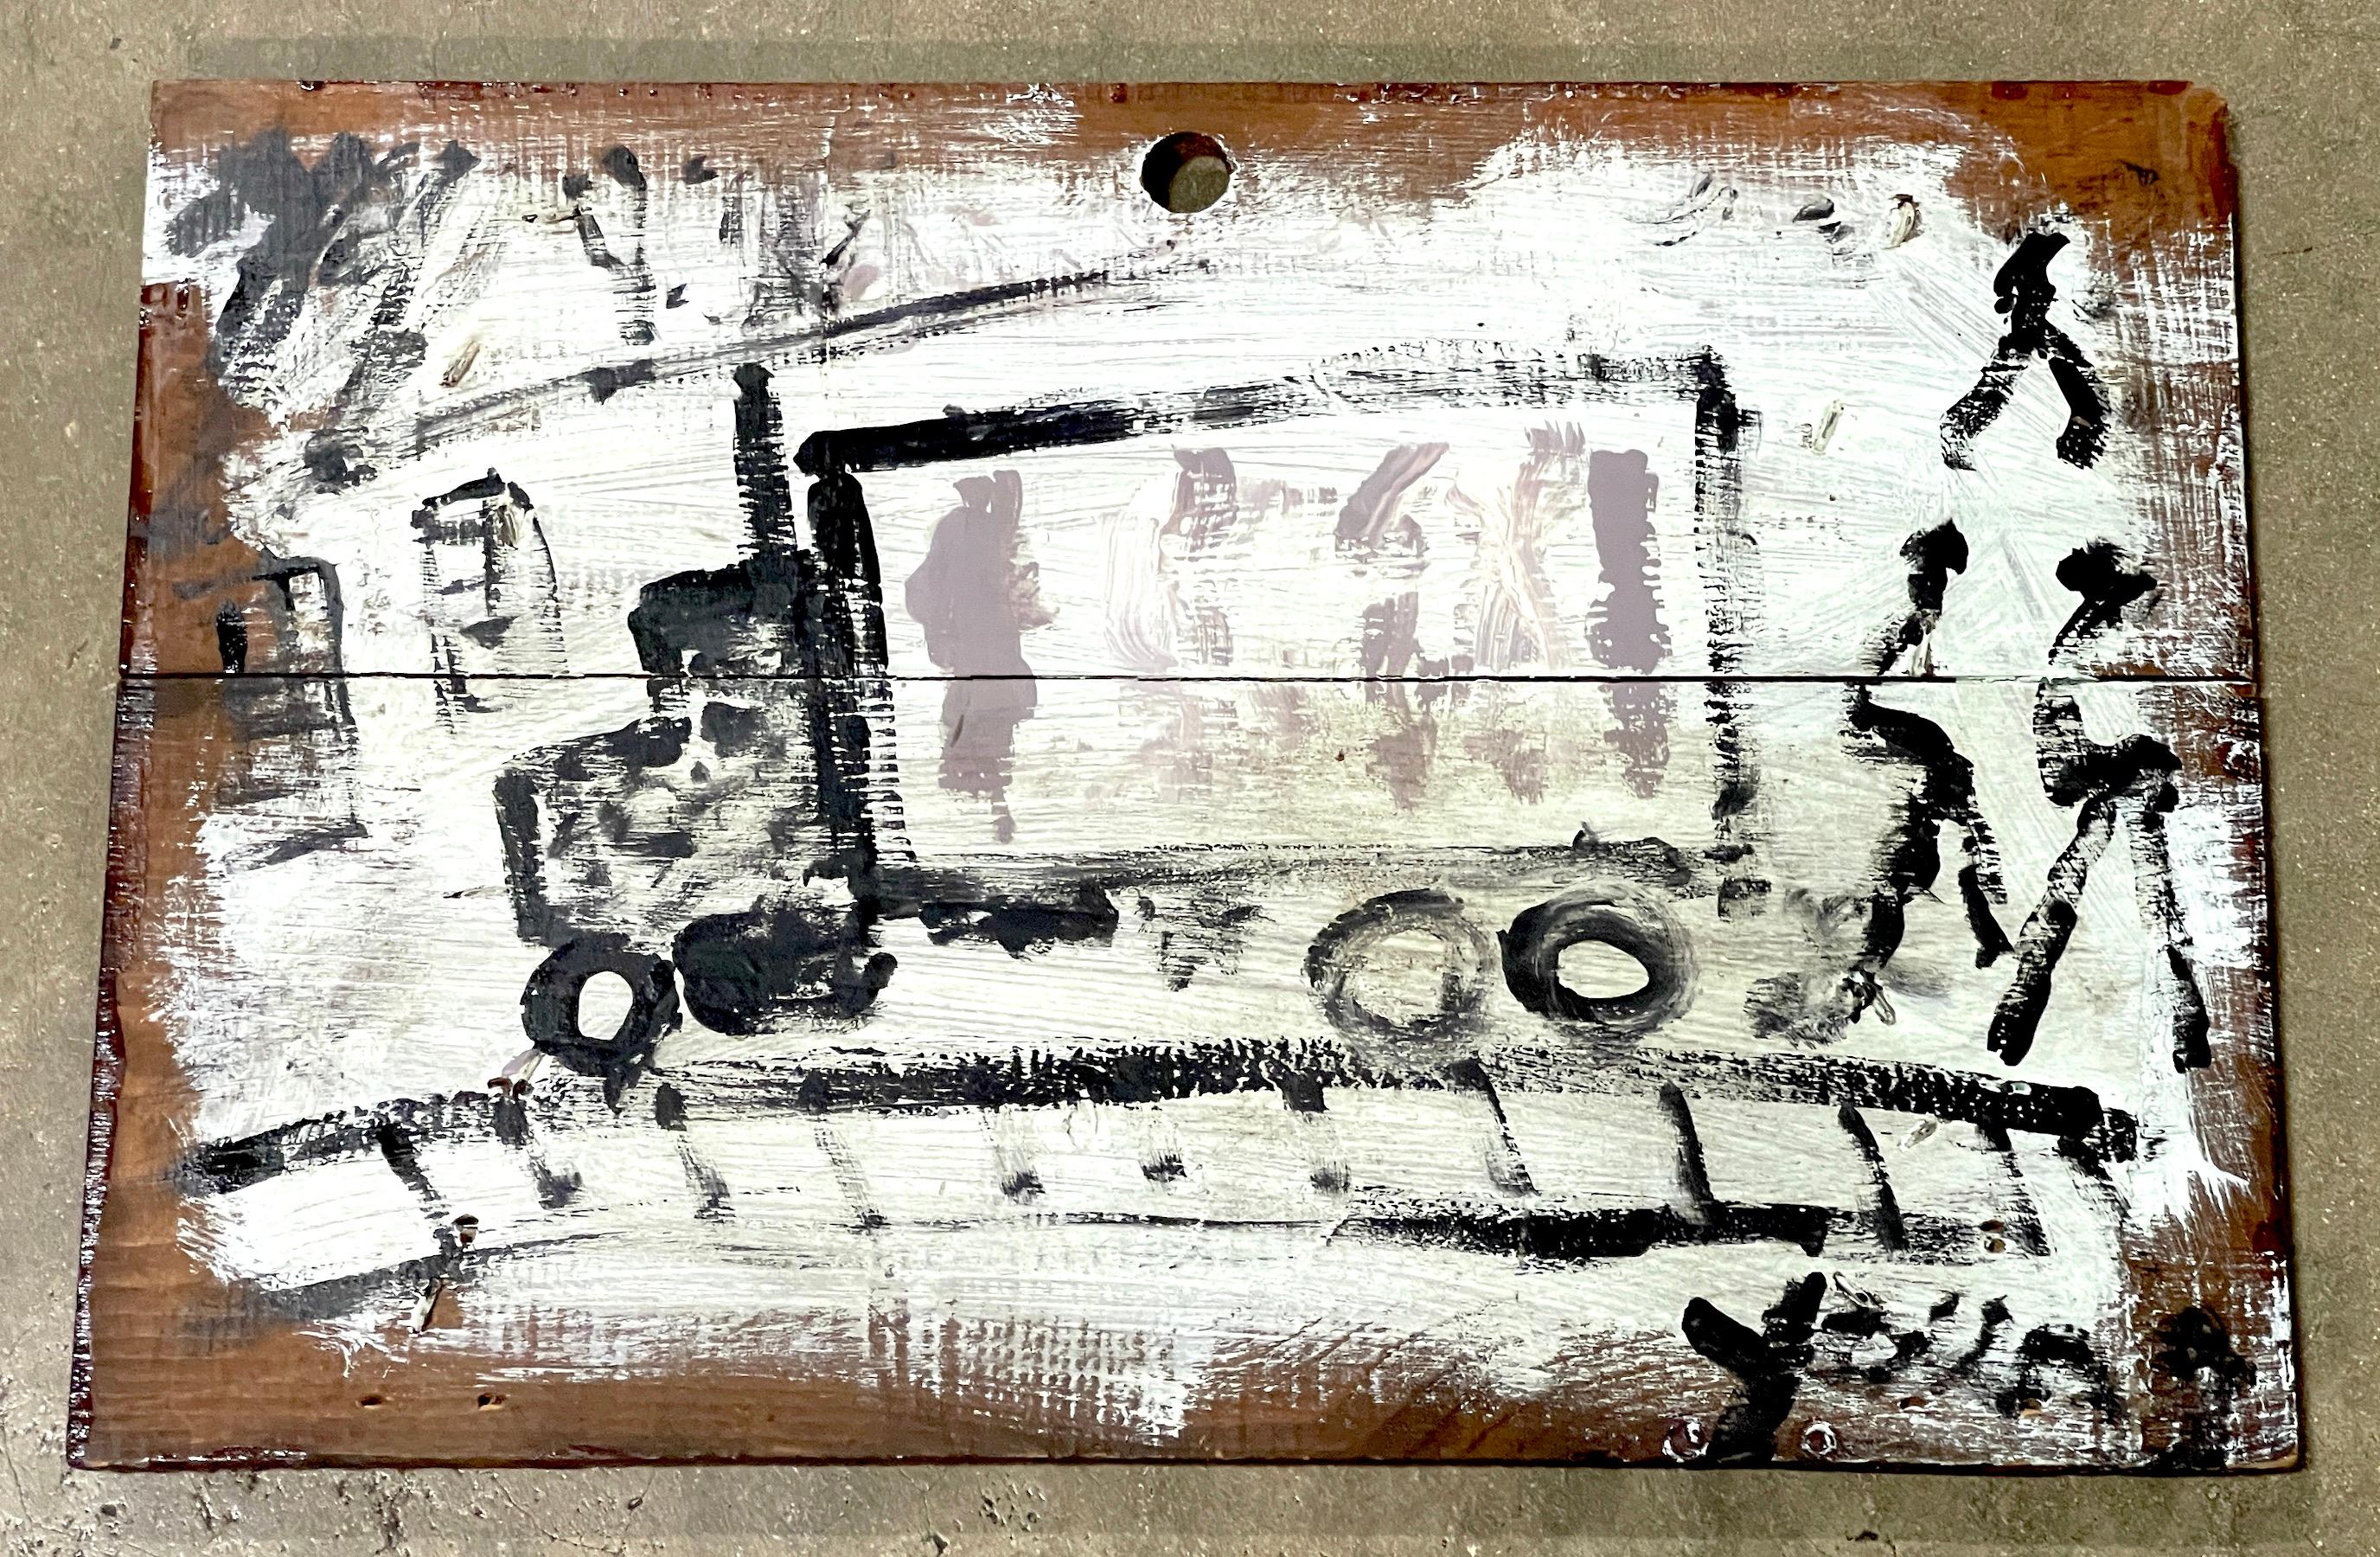 Purvis Young, Cityscape with Truck & Figures 
Painted with a depth of imagination, with whitened background of buildings, moving truck with warriors on a railroad like road,. This composition is painted on the found object, a vintage wood Budweiser